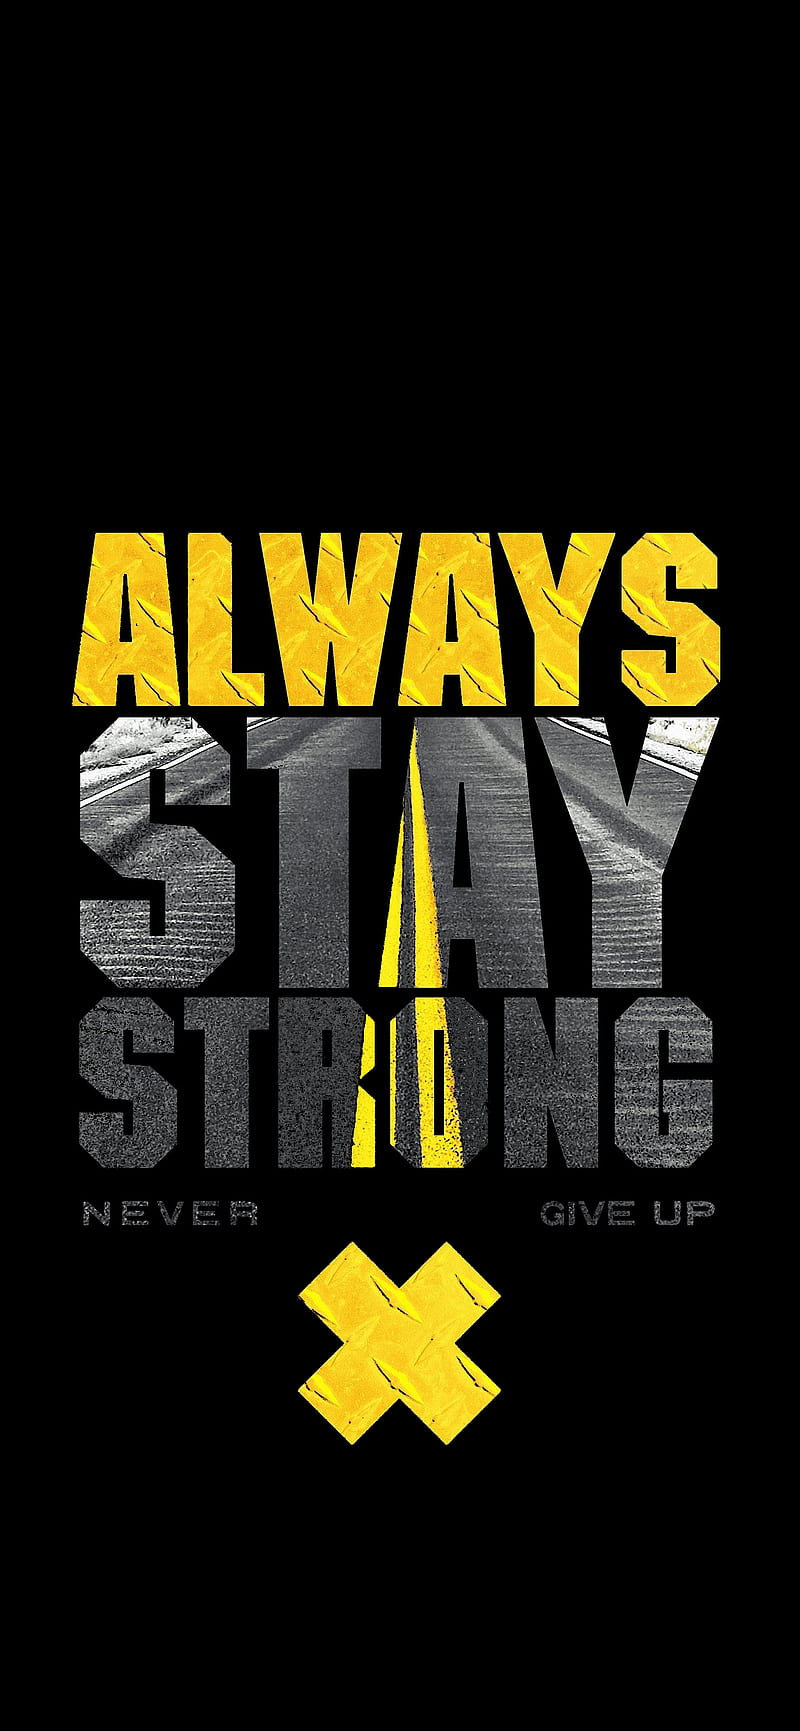 Always Stay Strong iPhone Wallpaper HD  iPhone Wallpapers  iPhone  Wallpapers